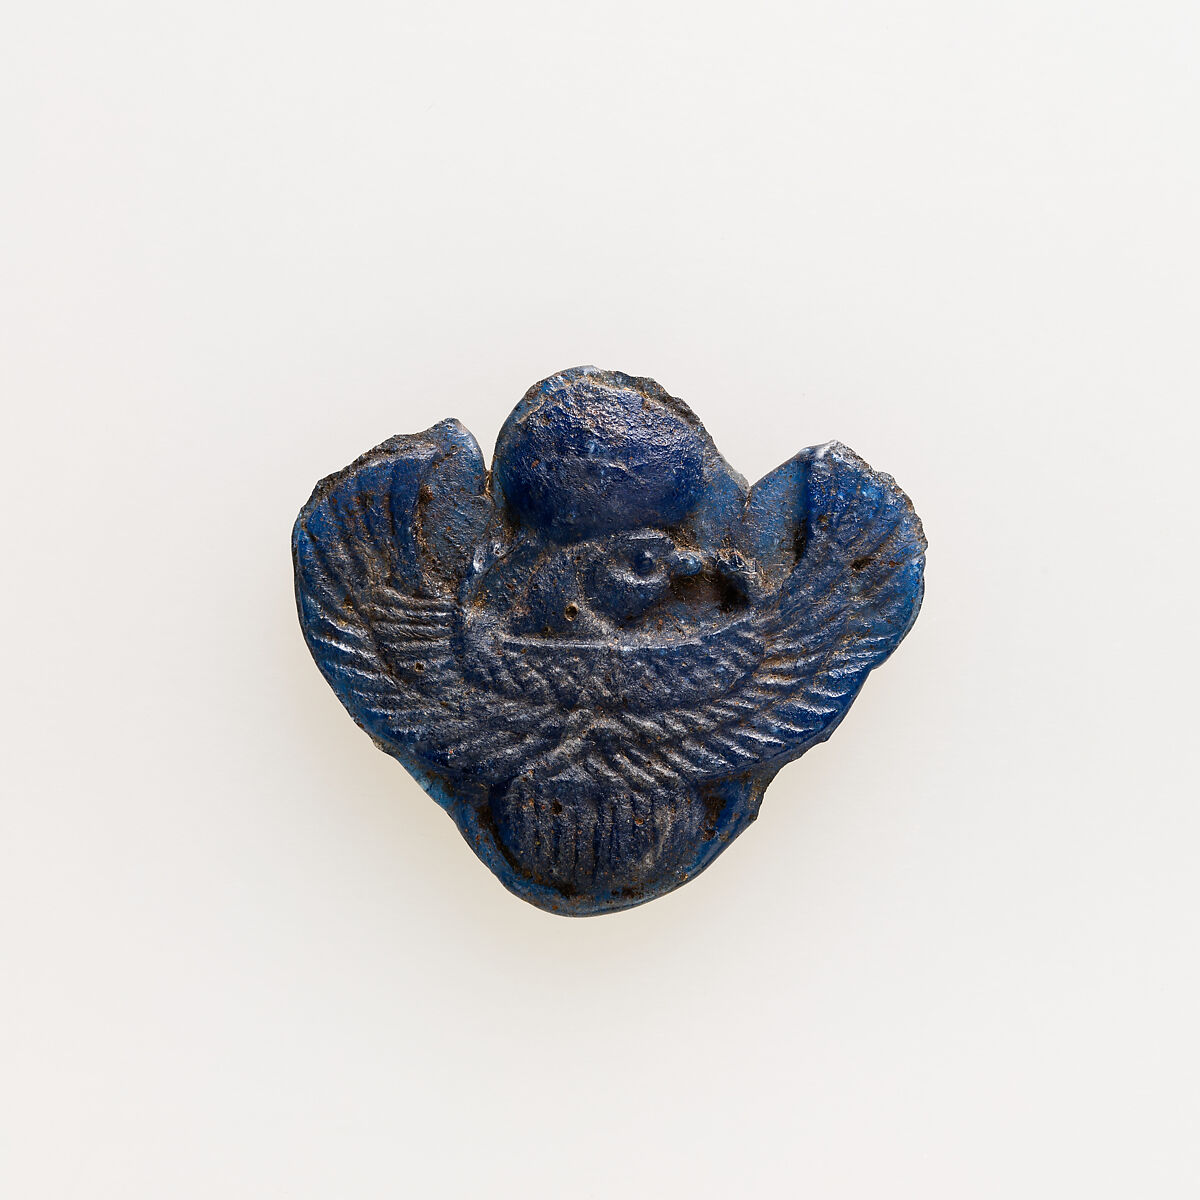 Amulet of winged scarab with falcon head, Glass 